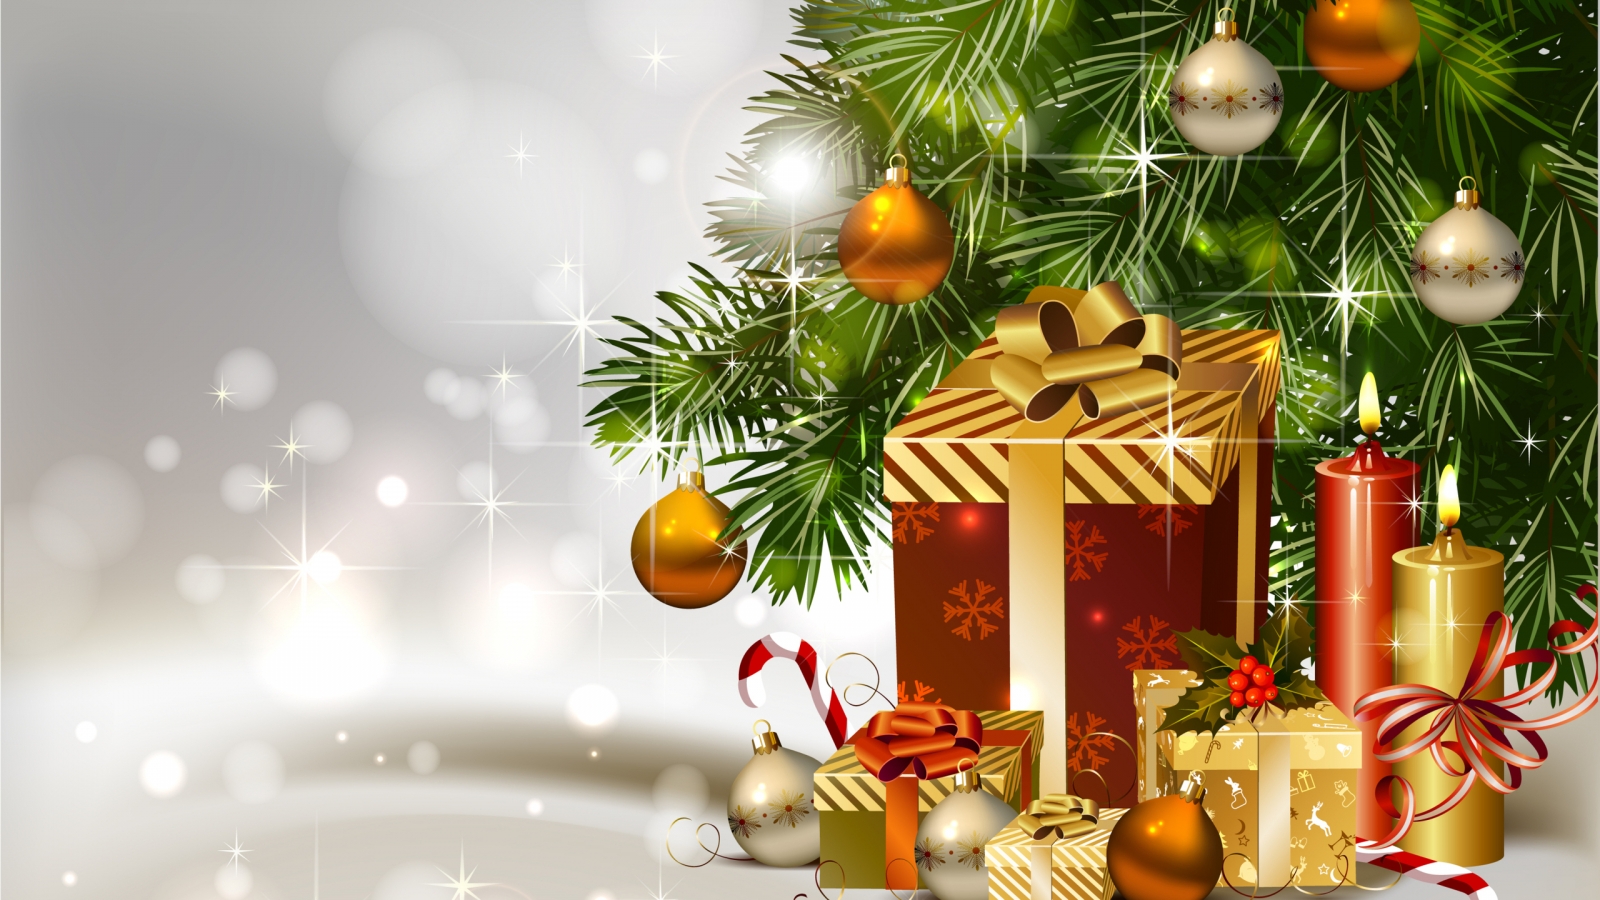 Gifts Under Christmas Tree for 1600 x 900 HDTV resolution